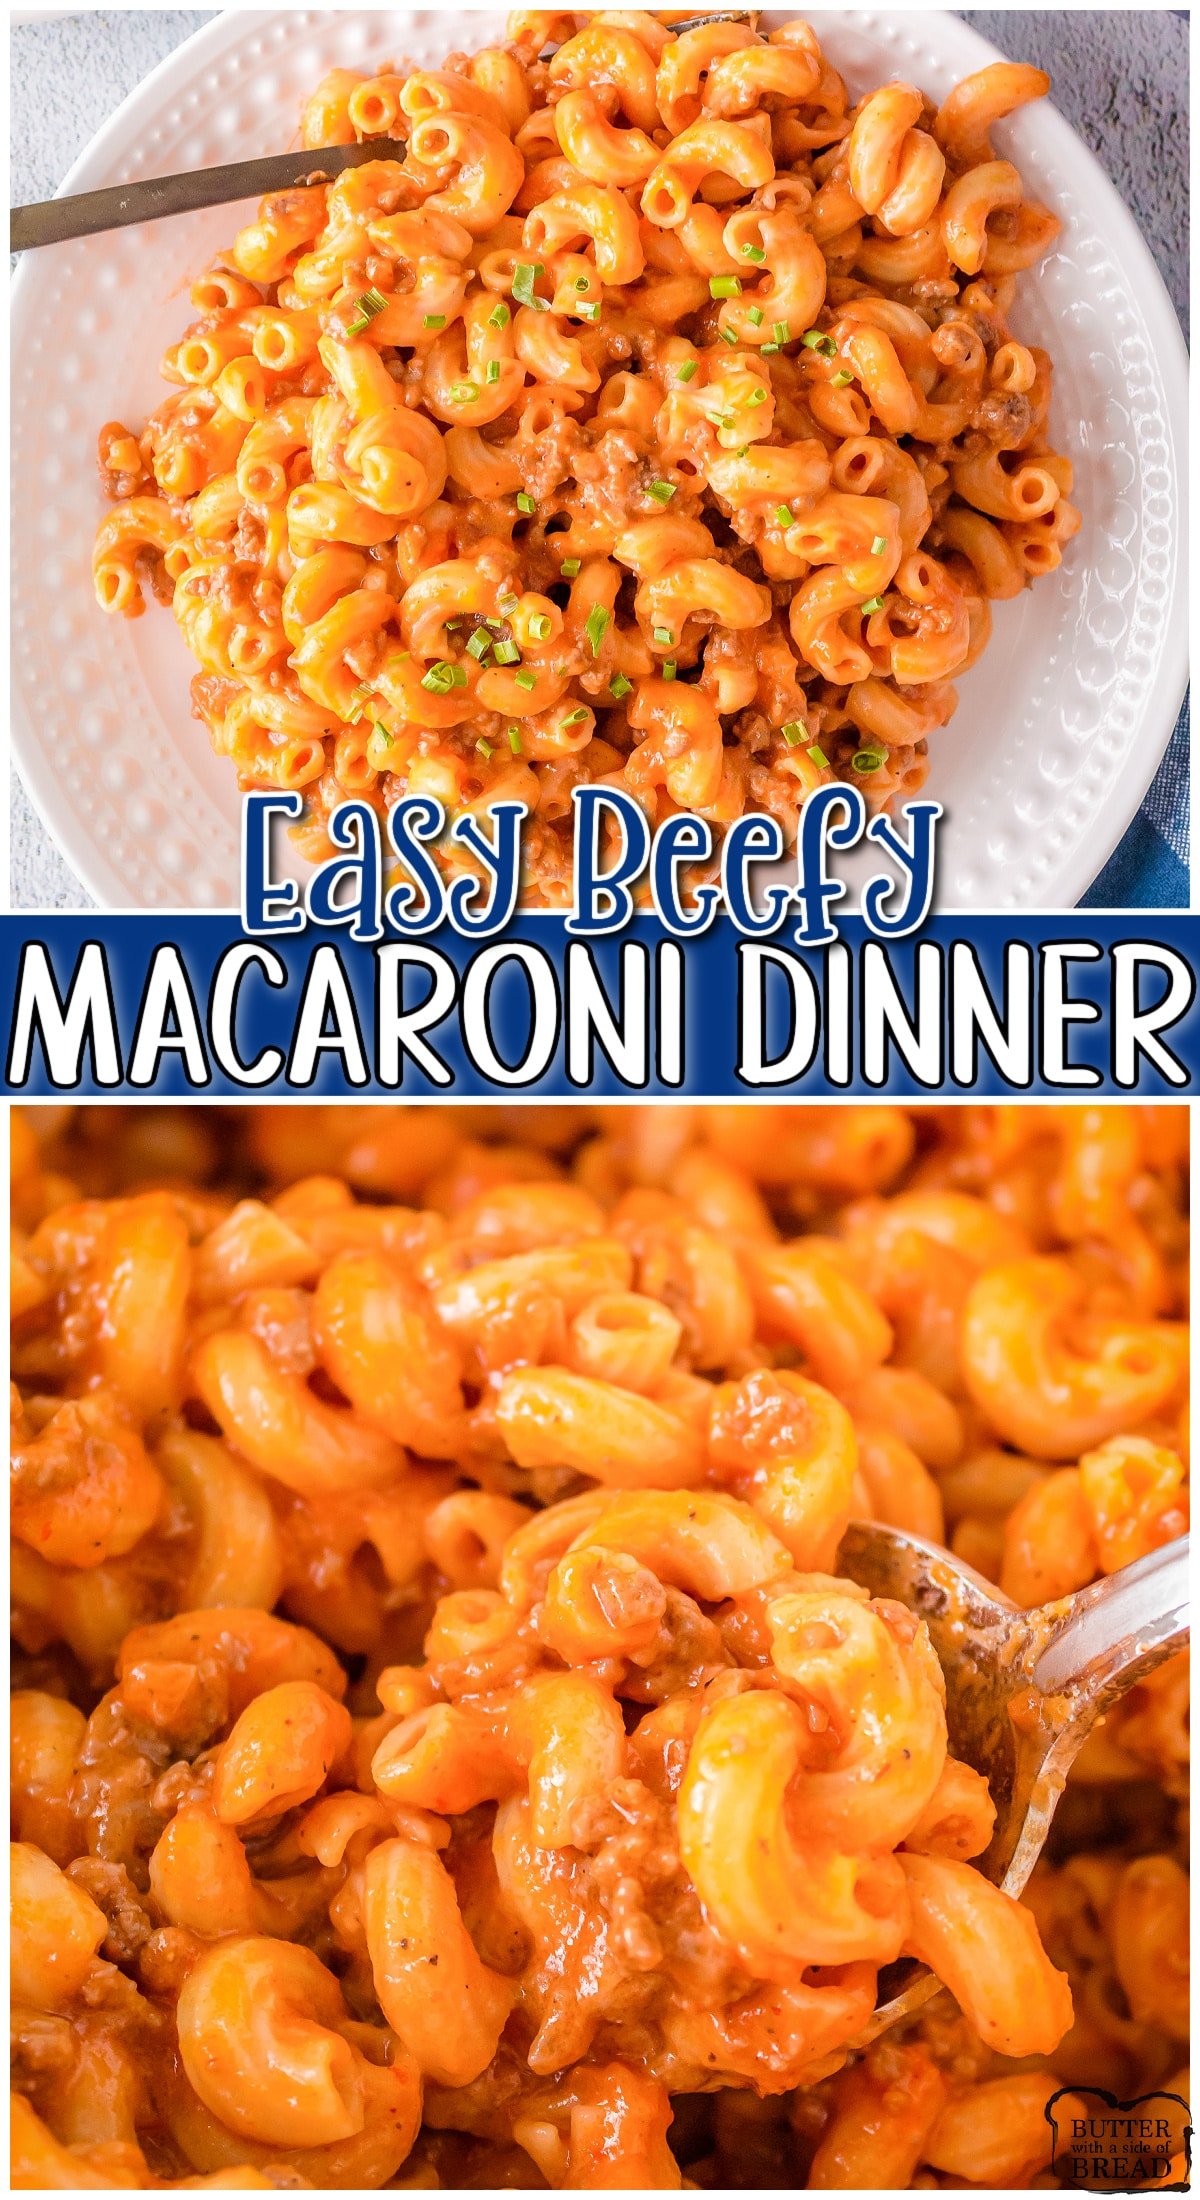 Beefy Mac Dinner made with pantry ingredients & served topped with plenty of cheese in 35 minutes! Macaroni combined with a flavorful beef tomato sauce is the perfect weeknight dinner!